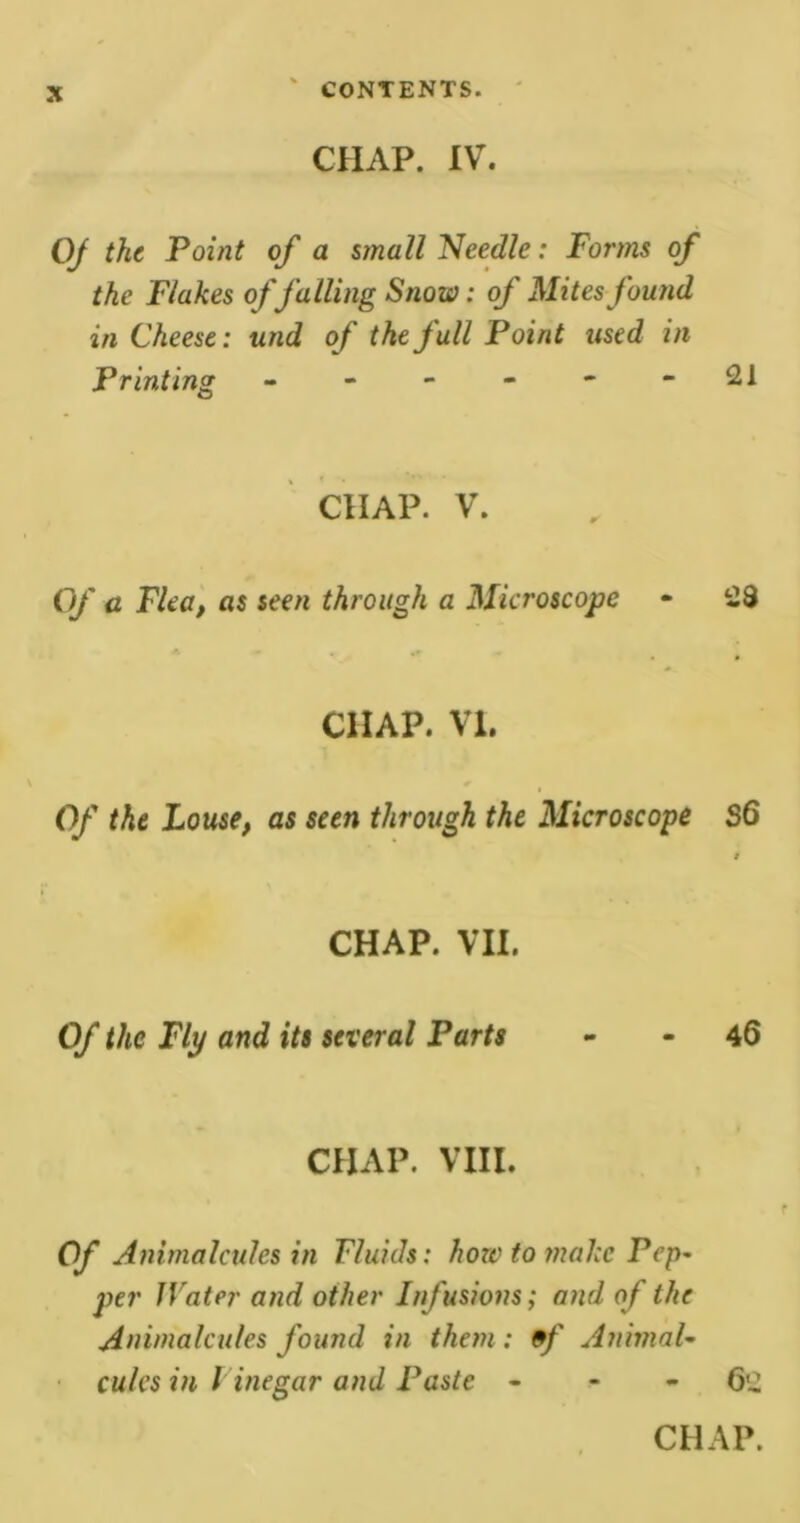 CHAP. IV. QJ the Point of a small Needle: Forms of the Flakes of falling Snow: of Mites found in Cheese: und of the full Point used in Printing - - - - - - 2i CHAP. V. Of a Flea, «$ seen through a Microscope - 28 CHAP. VI. Of the Louse, as seen through the Microscope S6 CHAP. VII. Of the Fly and its several Parts - - 46 CHAP. VIII. Of Animalcules in Fluids: how to make Pep- per Water and other Infusions; and of the Animalcules found in them : 9f Animal- cules in V inegar and Paste - - - 62